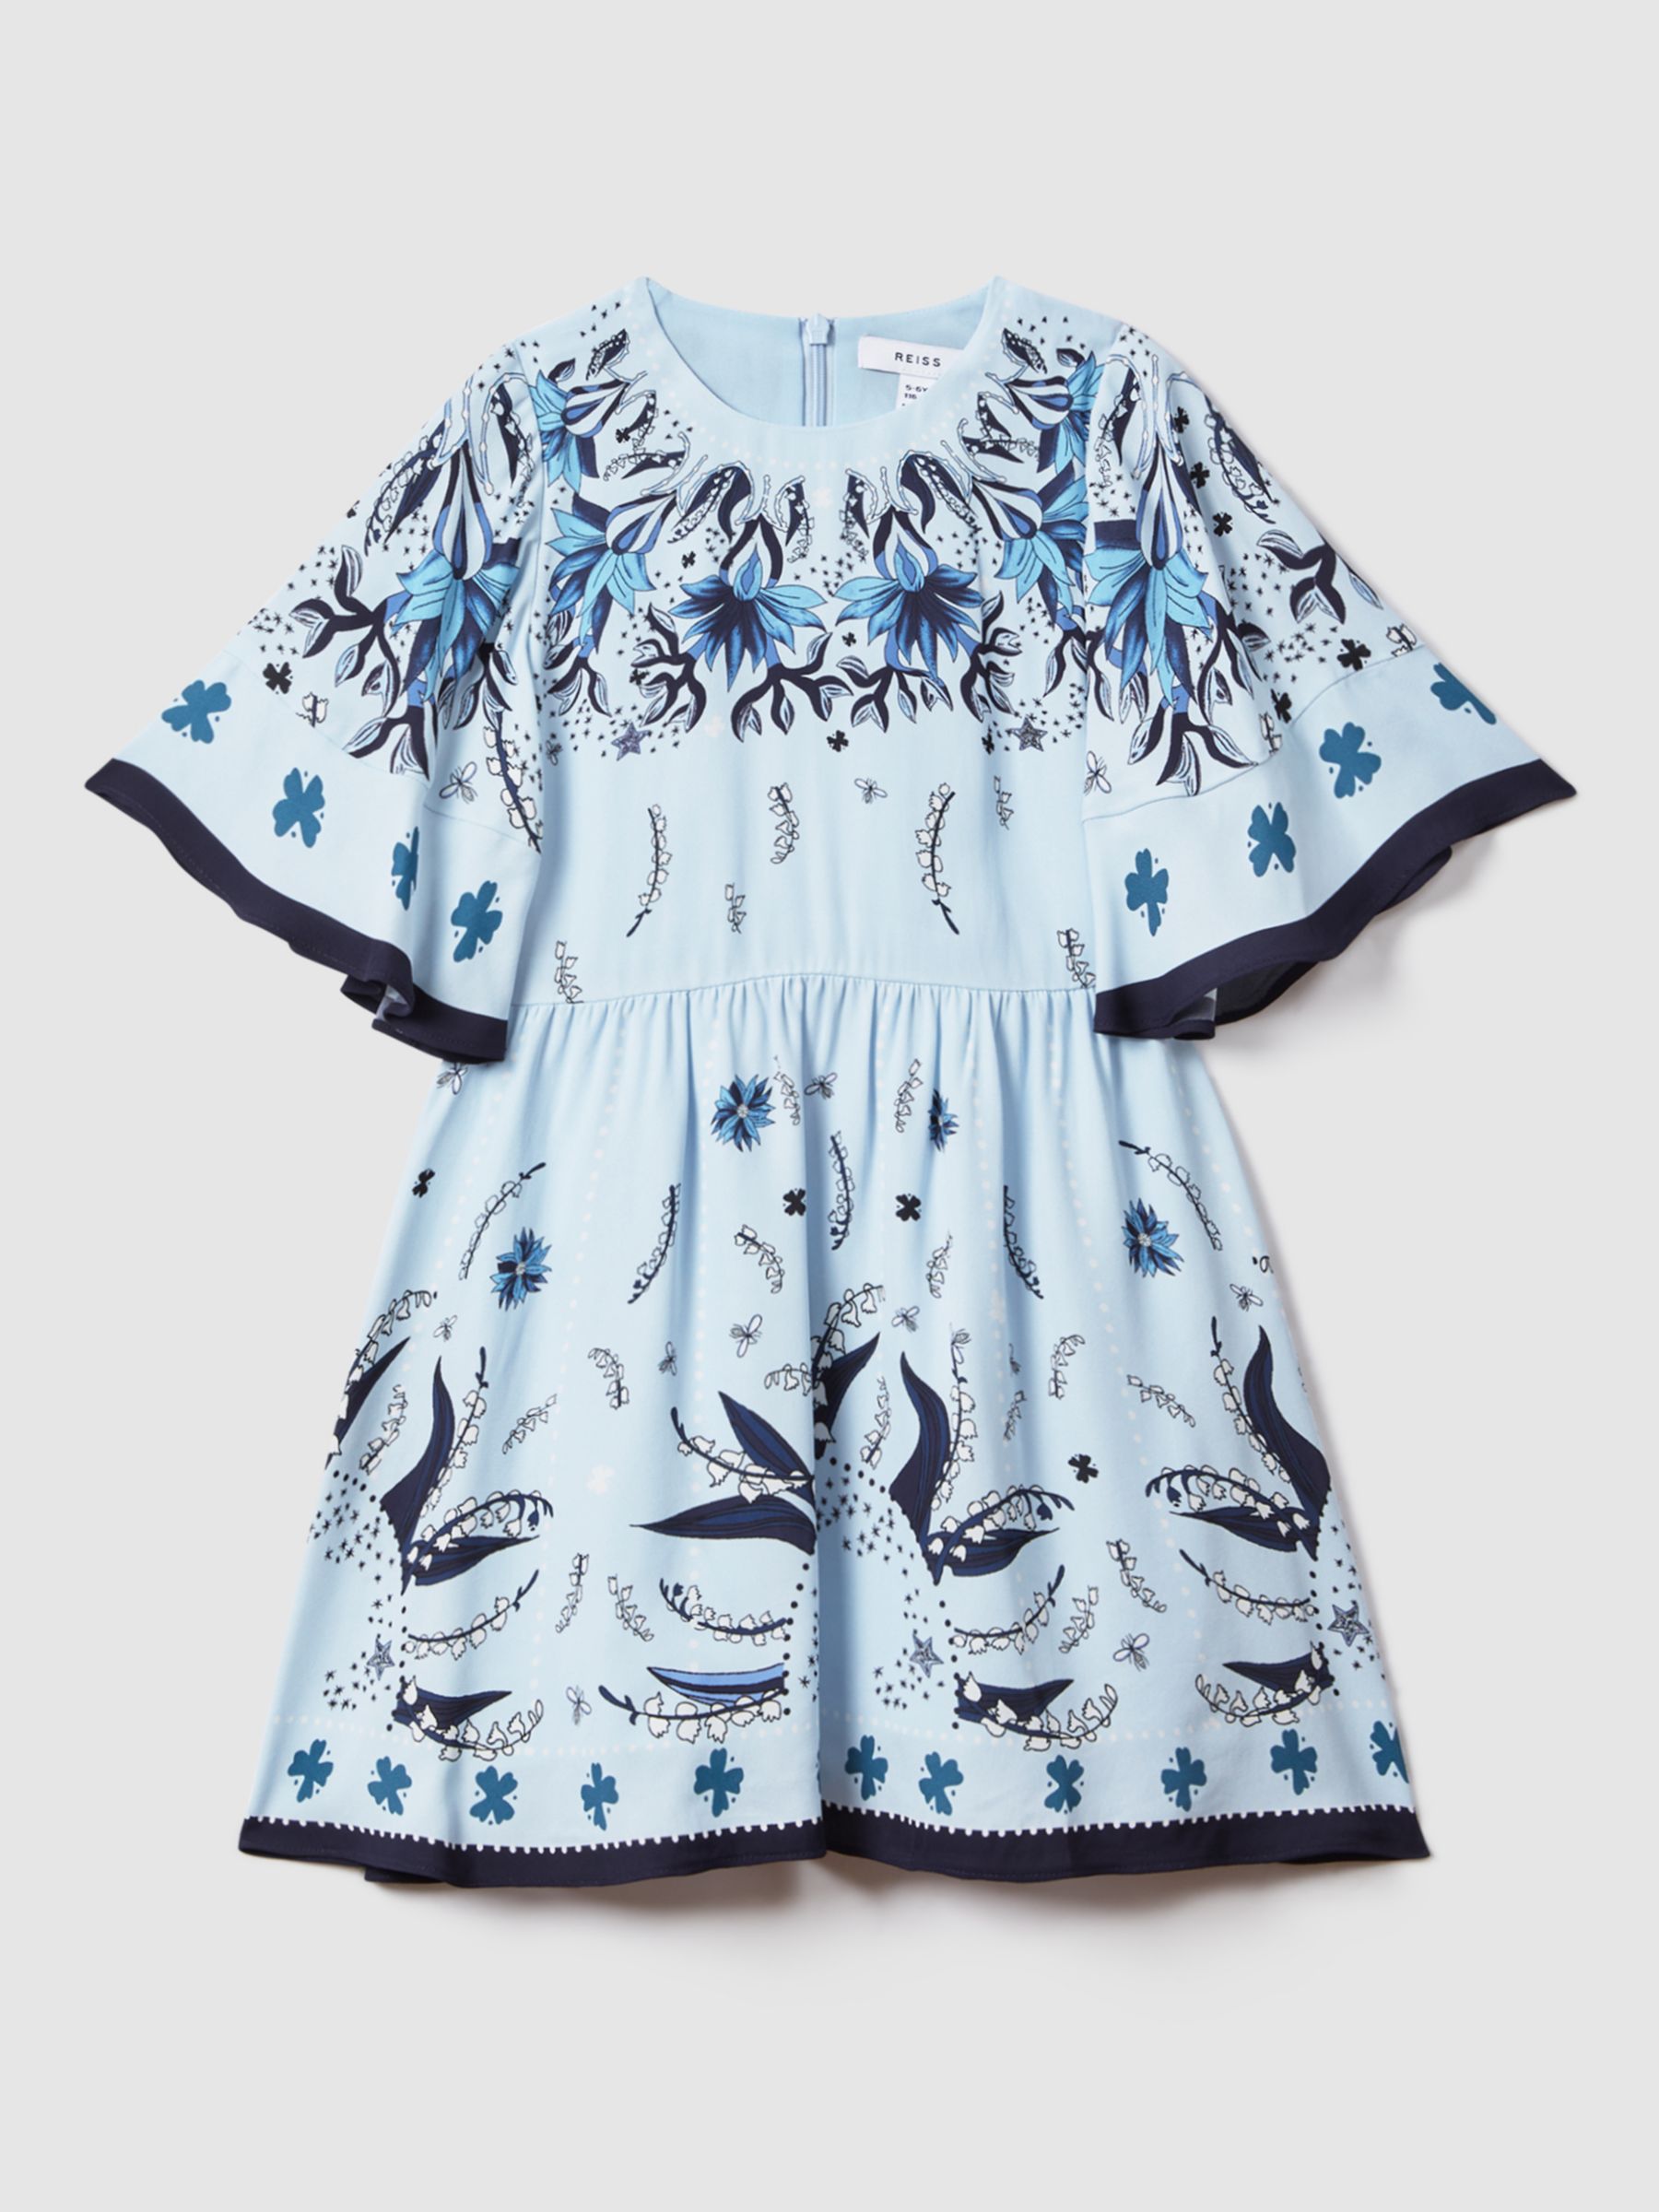 Buy Reiss Kids' Ania Floral Placement Print Dress, Blue Online at johnlewis.com